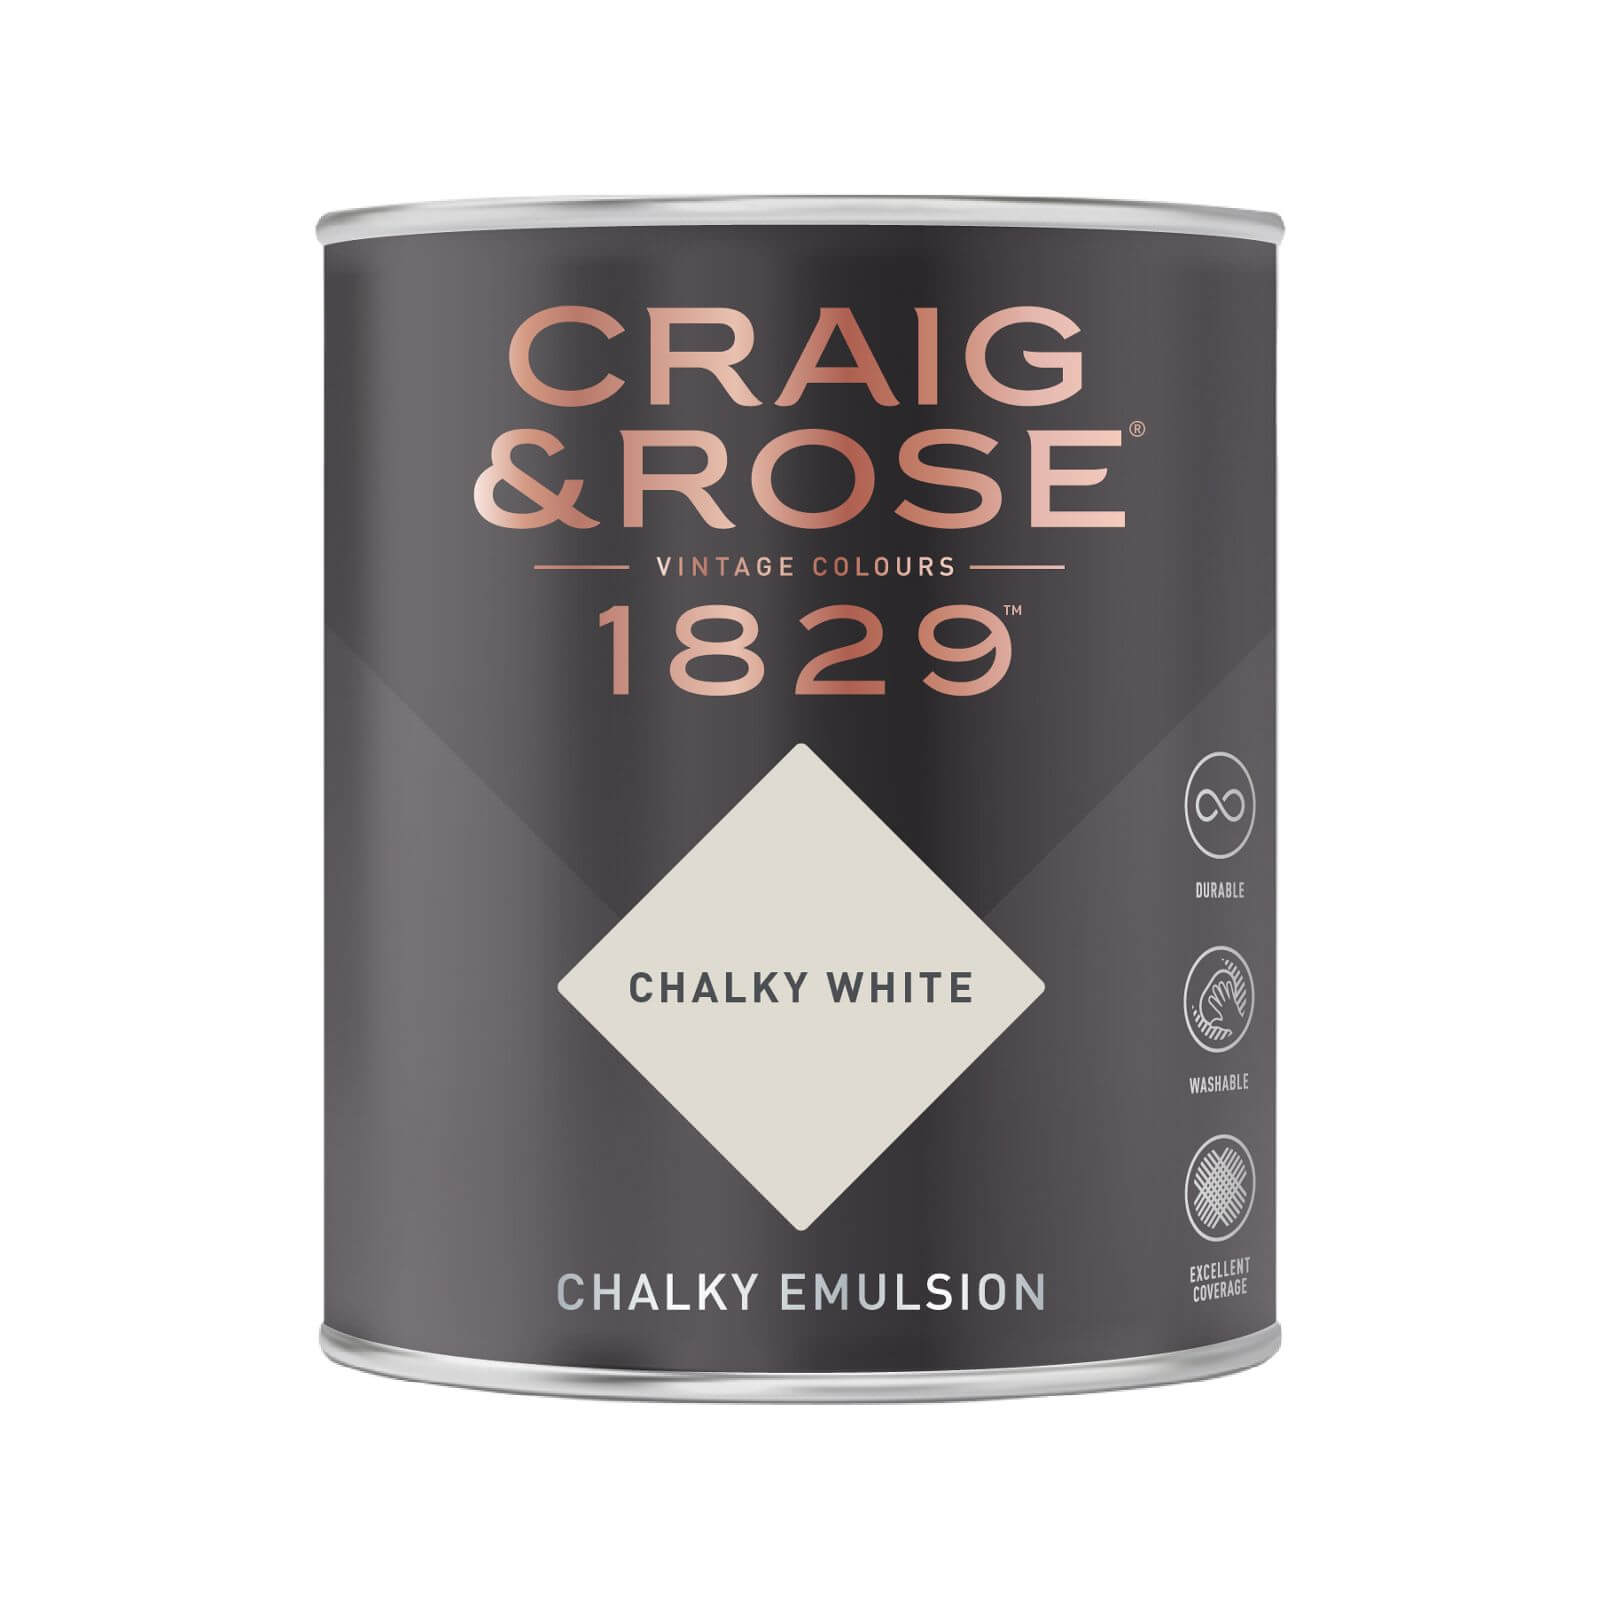 Craig & Rose 1829 Chalky Emulsion Paint Chalky White - 750ml